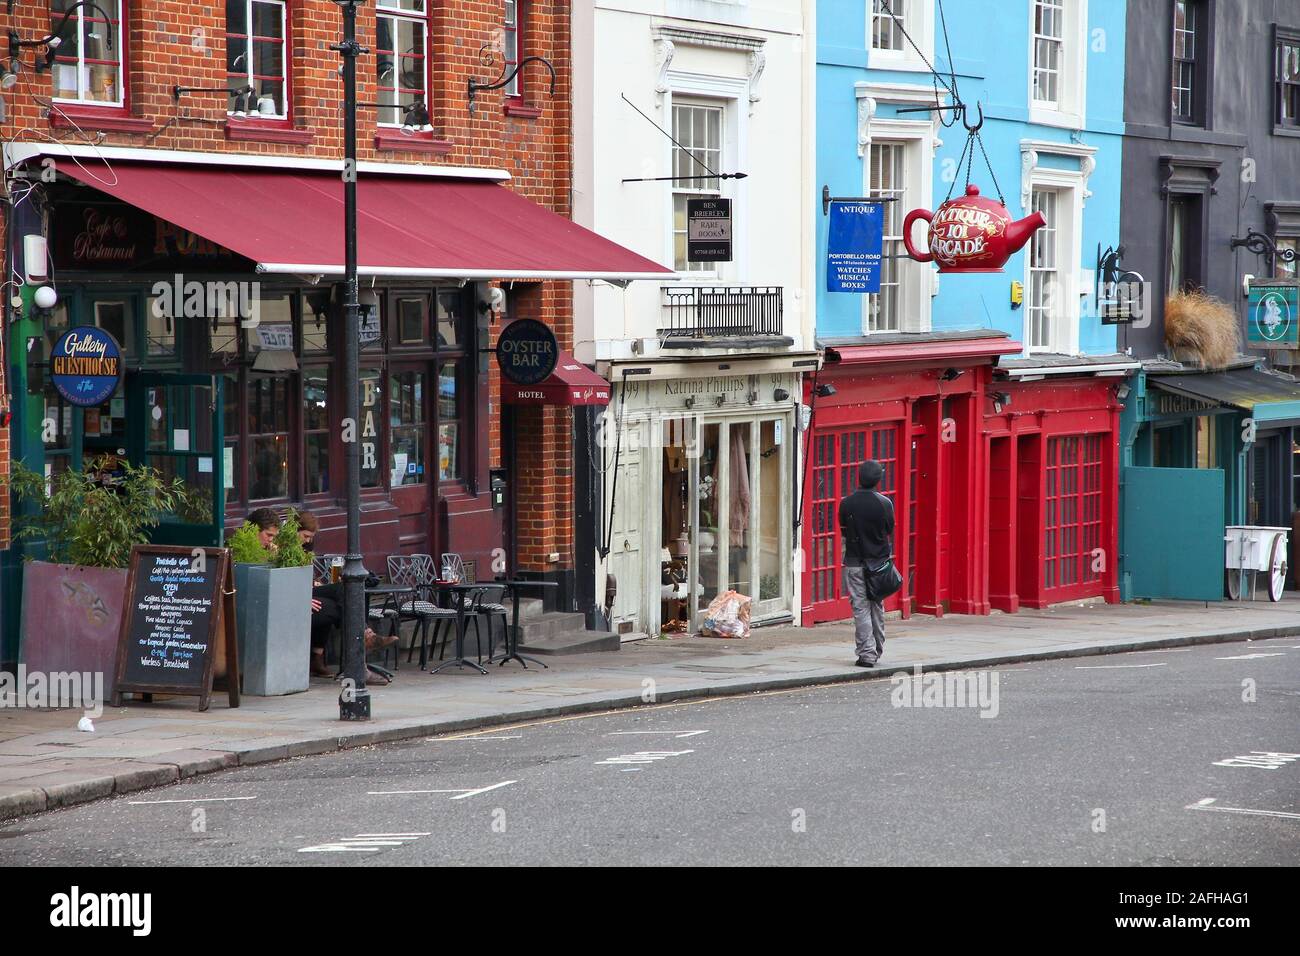 LONDON, UK - MAY 14, 2012: People visit Portobello Road in Notting Hill, London. Portobello Road Market at Notting Hill currently is one of top 15 sho Stock Photo